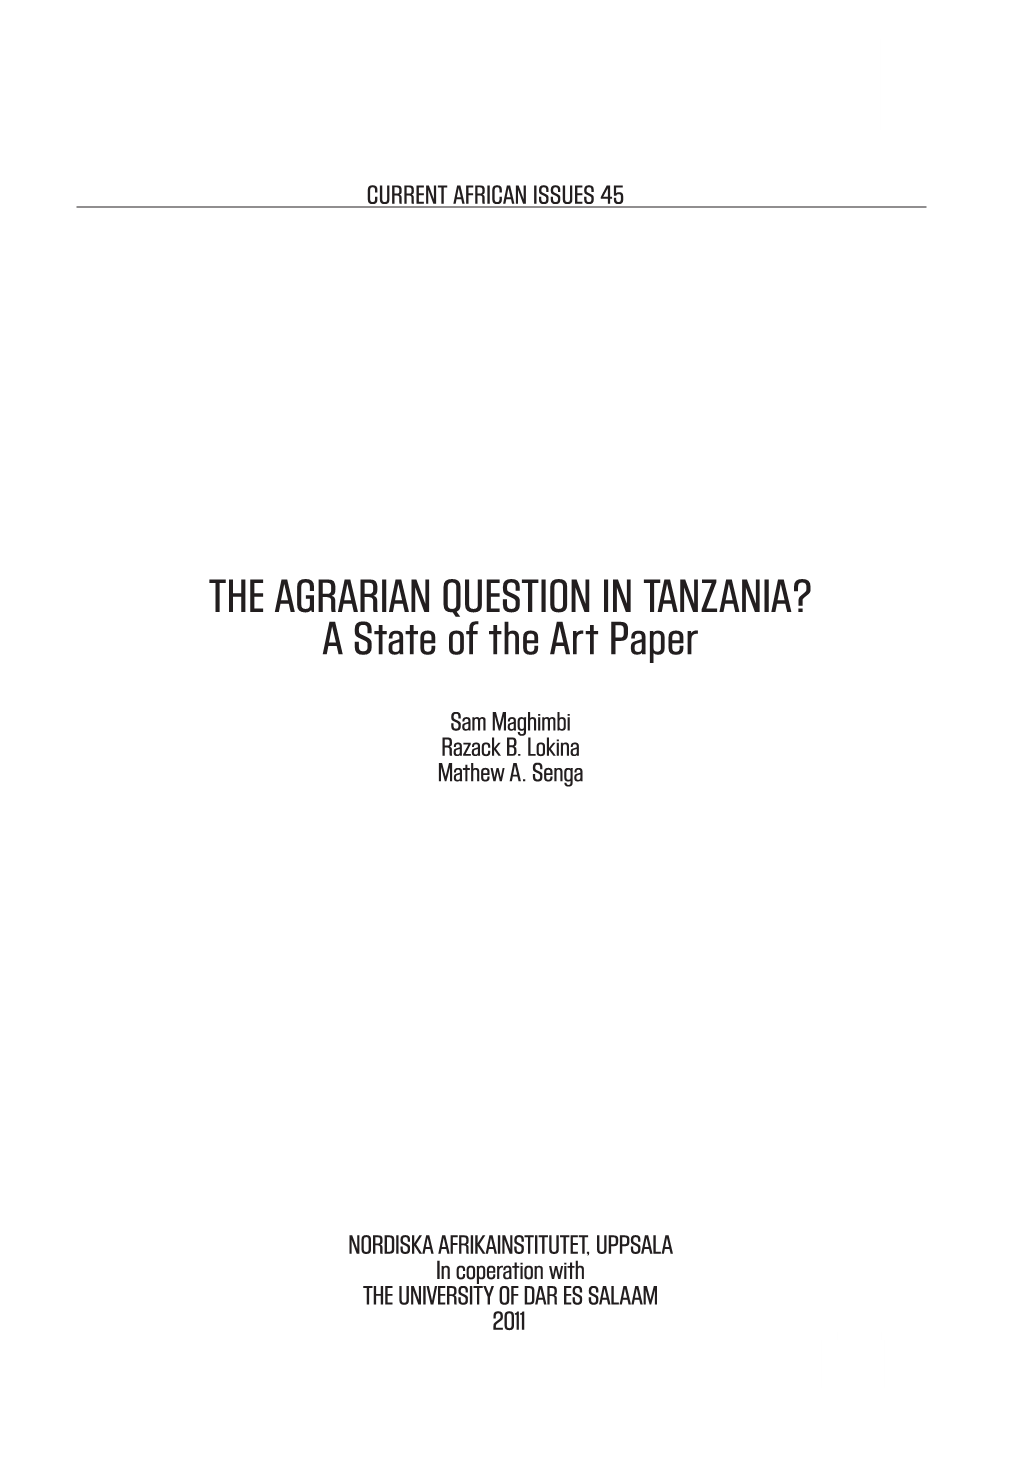 The Agrarian Question in Tanzania?